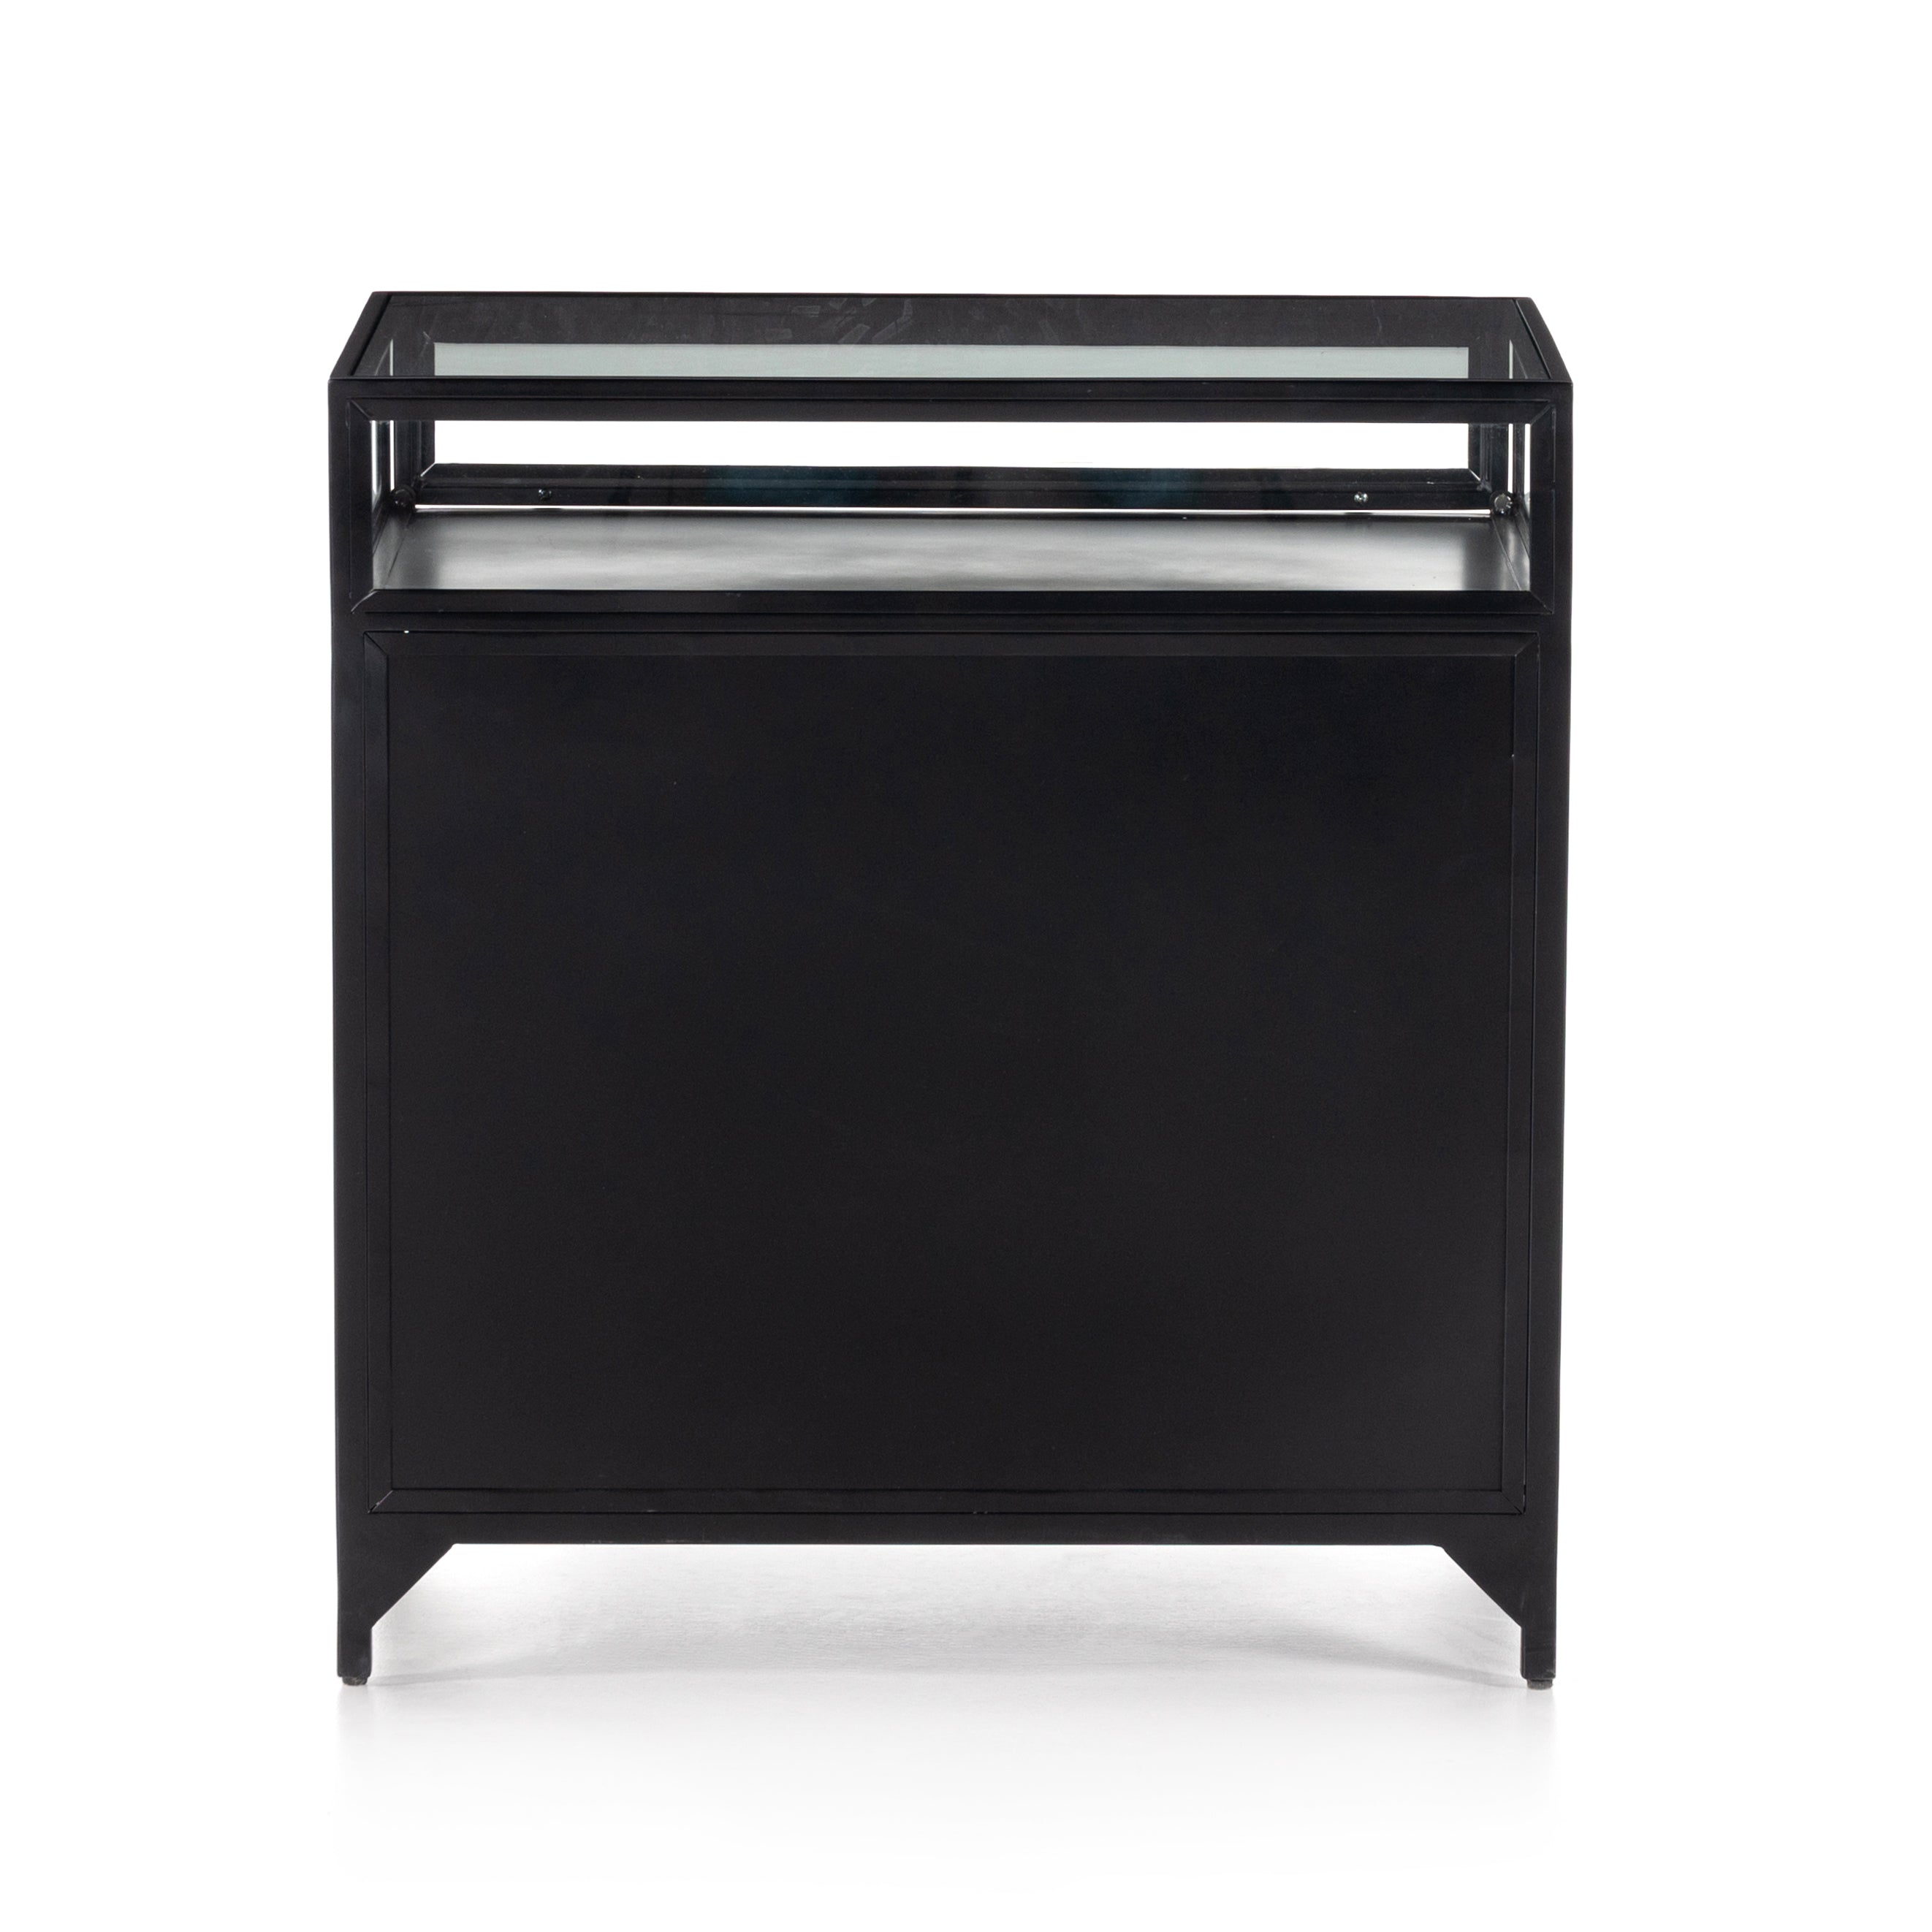 This Shadow Box Nightstand is finished in a gorgeous matte black. We love that the glass top allows you to showcase your favorite jewelry or family keepsake, while the two spacious drawers give you storage space. The knobs are finished in bronze to give this piece a sleek contrast.  Overall Dimensions: 28.00"w x 17.75"d x 30.00"h Materials: Iron, Tempered Glass, Glass